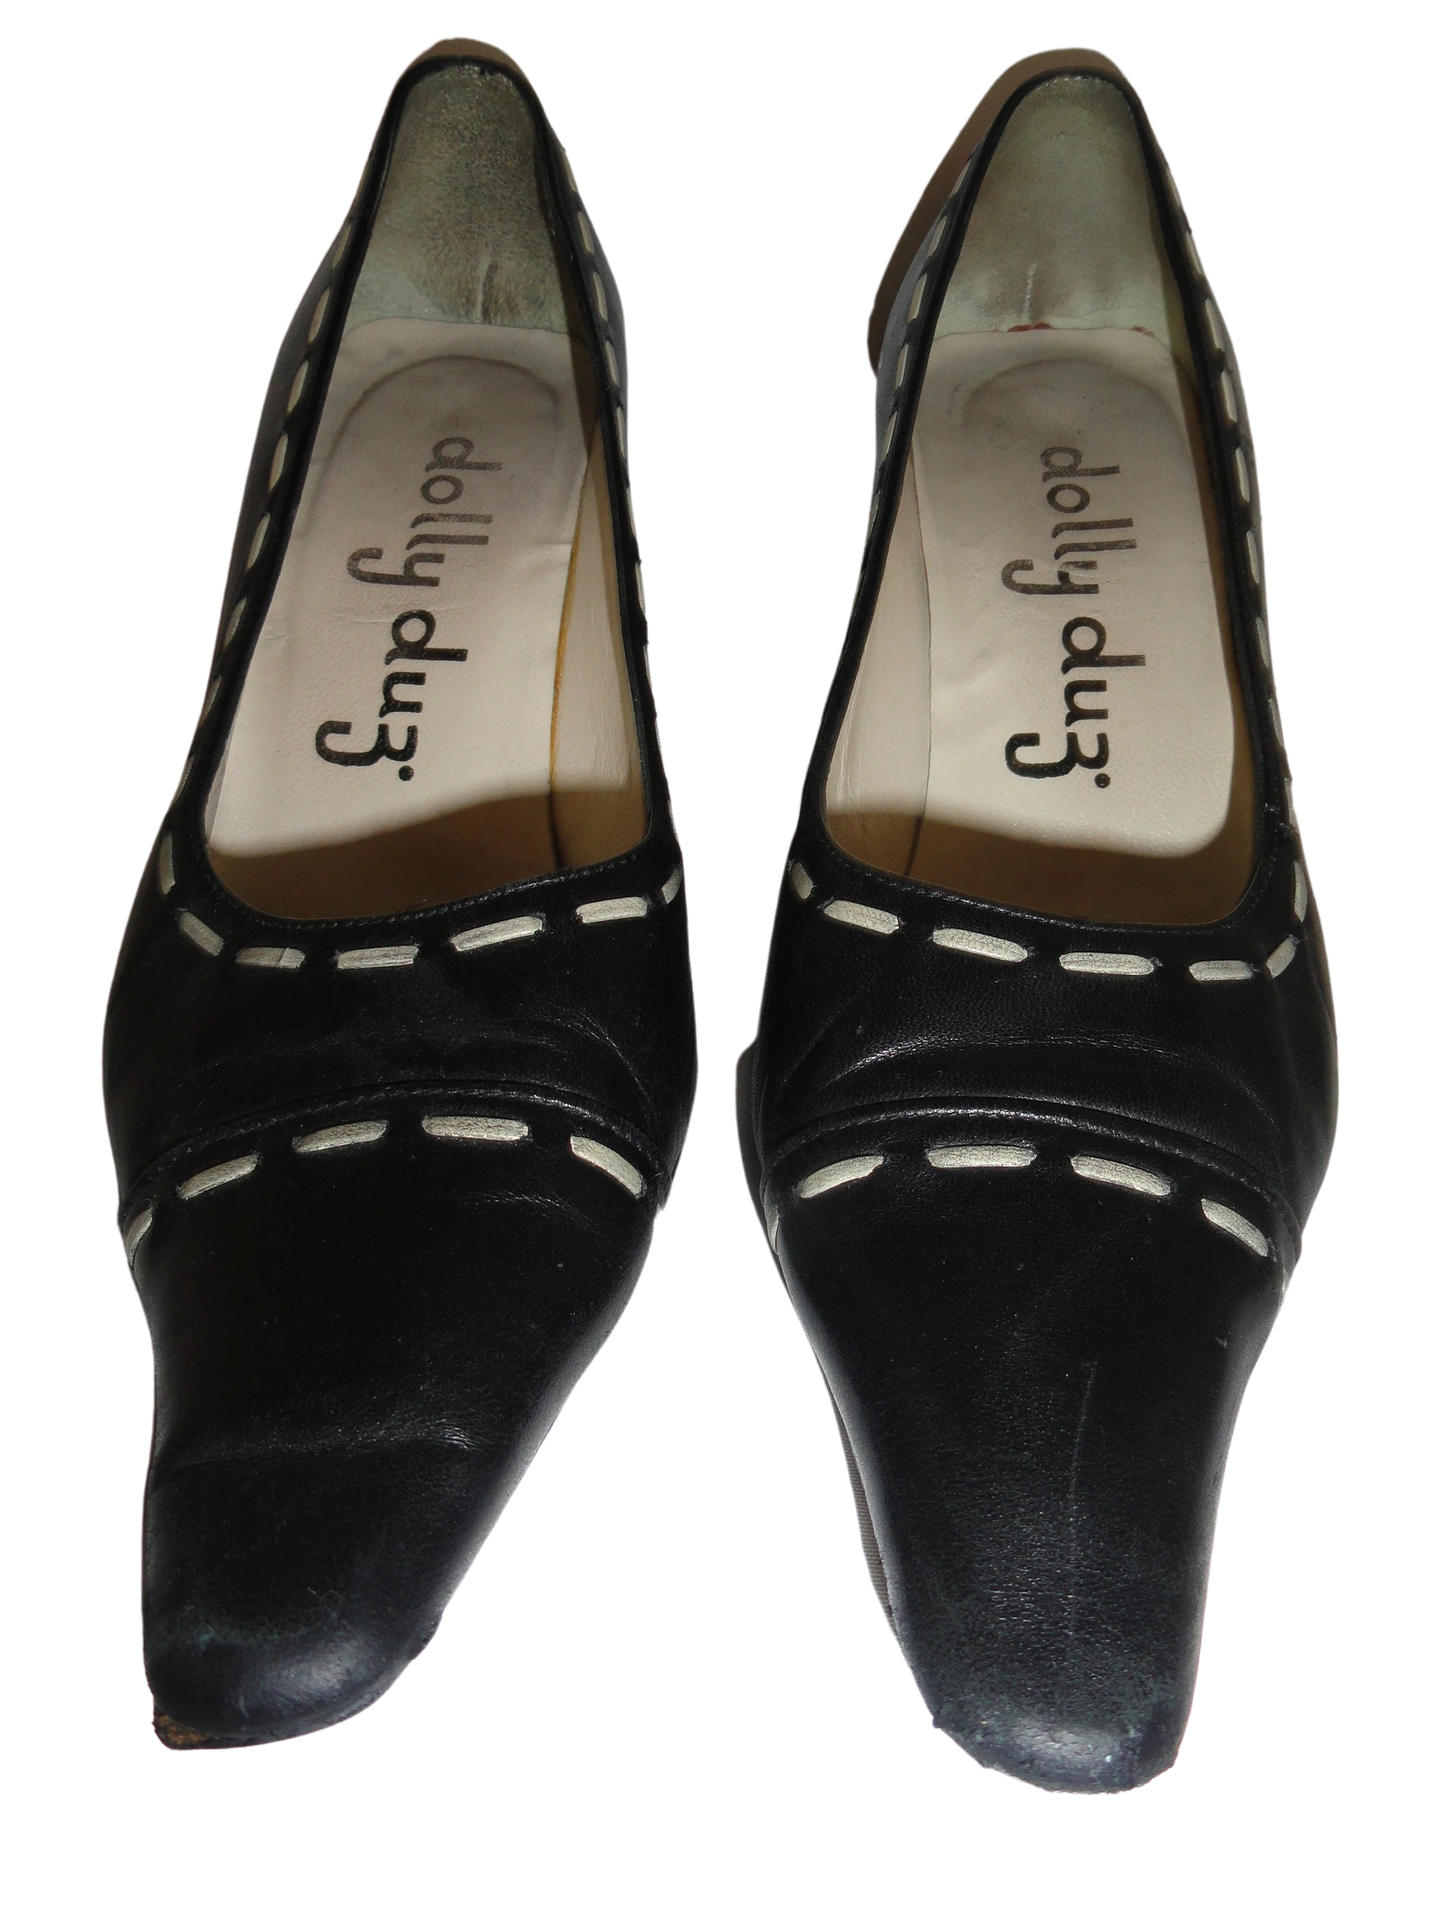 Dolly Duz High Heels Black Leather and White Leather Laced Size 5-1/2 SKU 000277-1